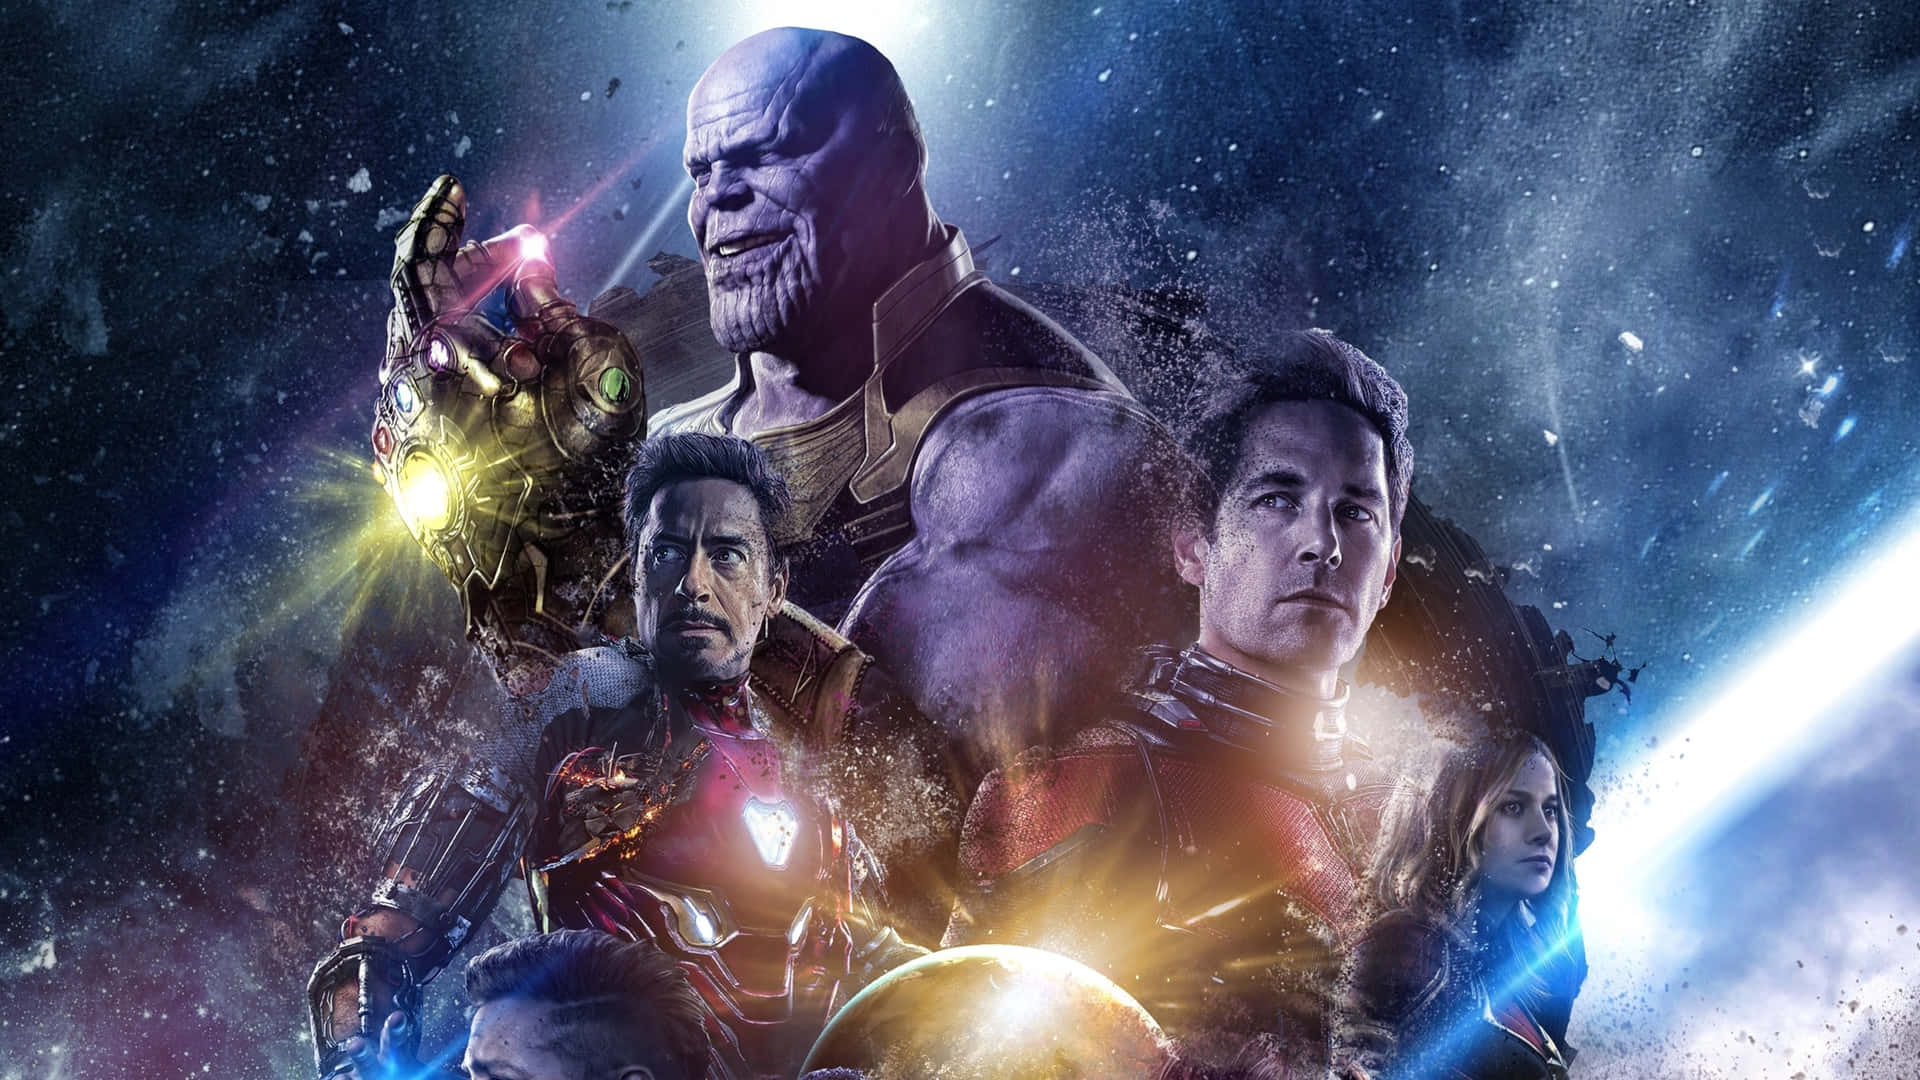 Download The Avengers: Endgame cast comes together for one last heroic  mission.